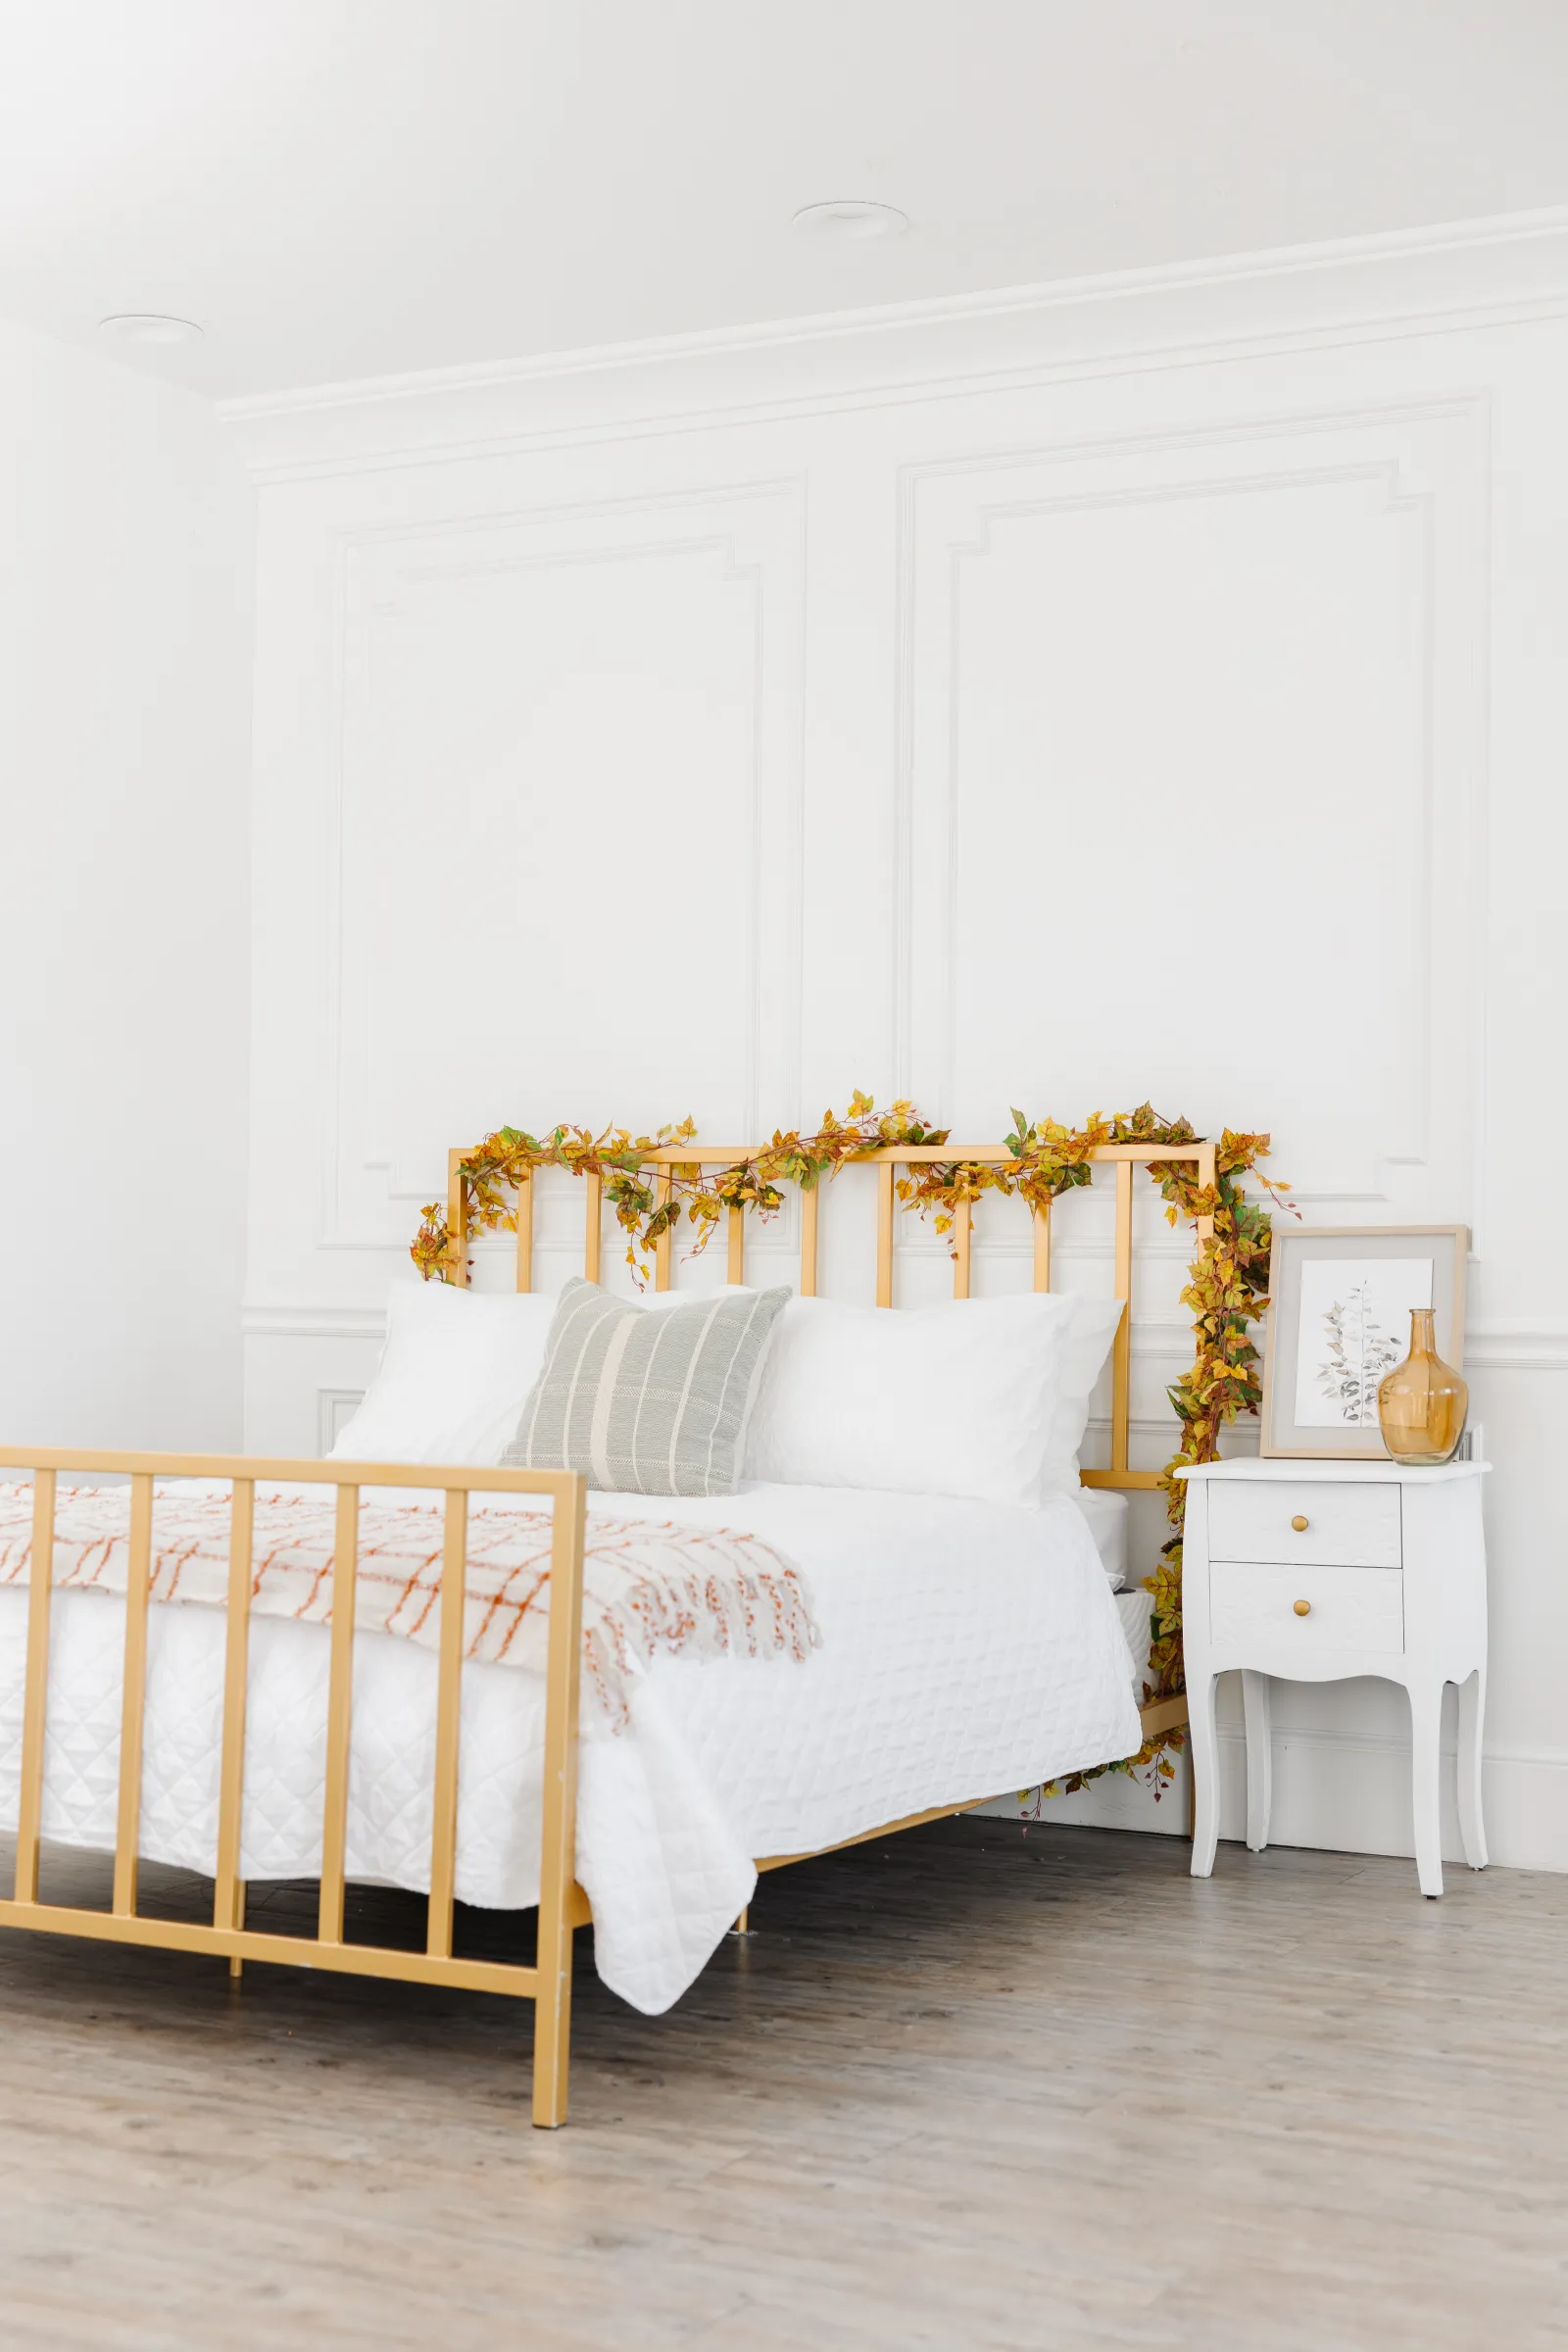 White bedding queen sized bed in a Gold bed frame